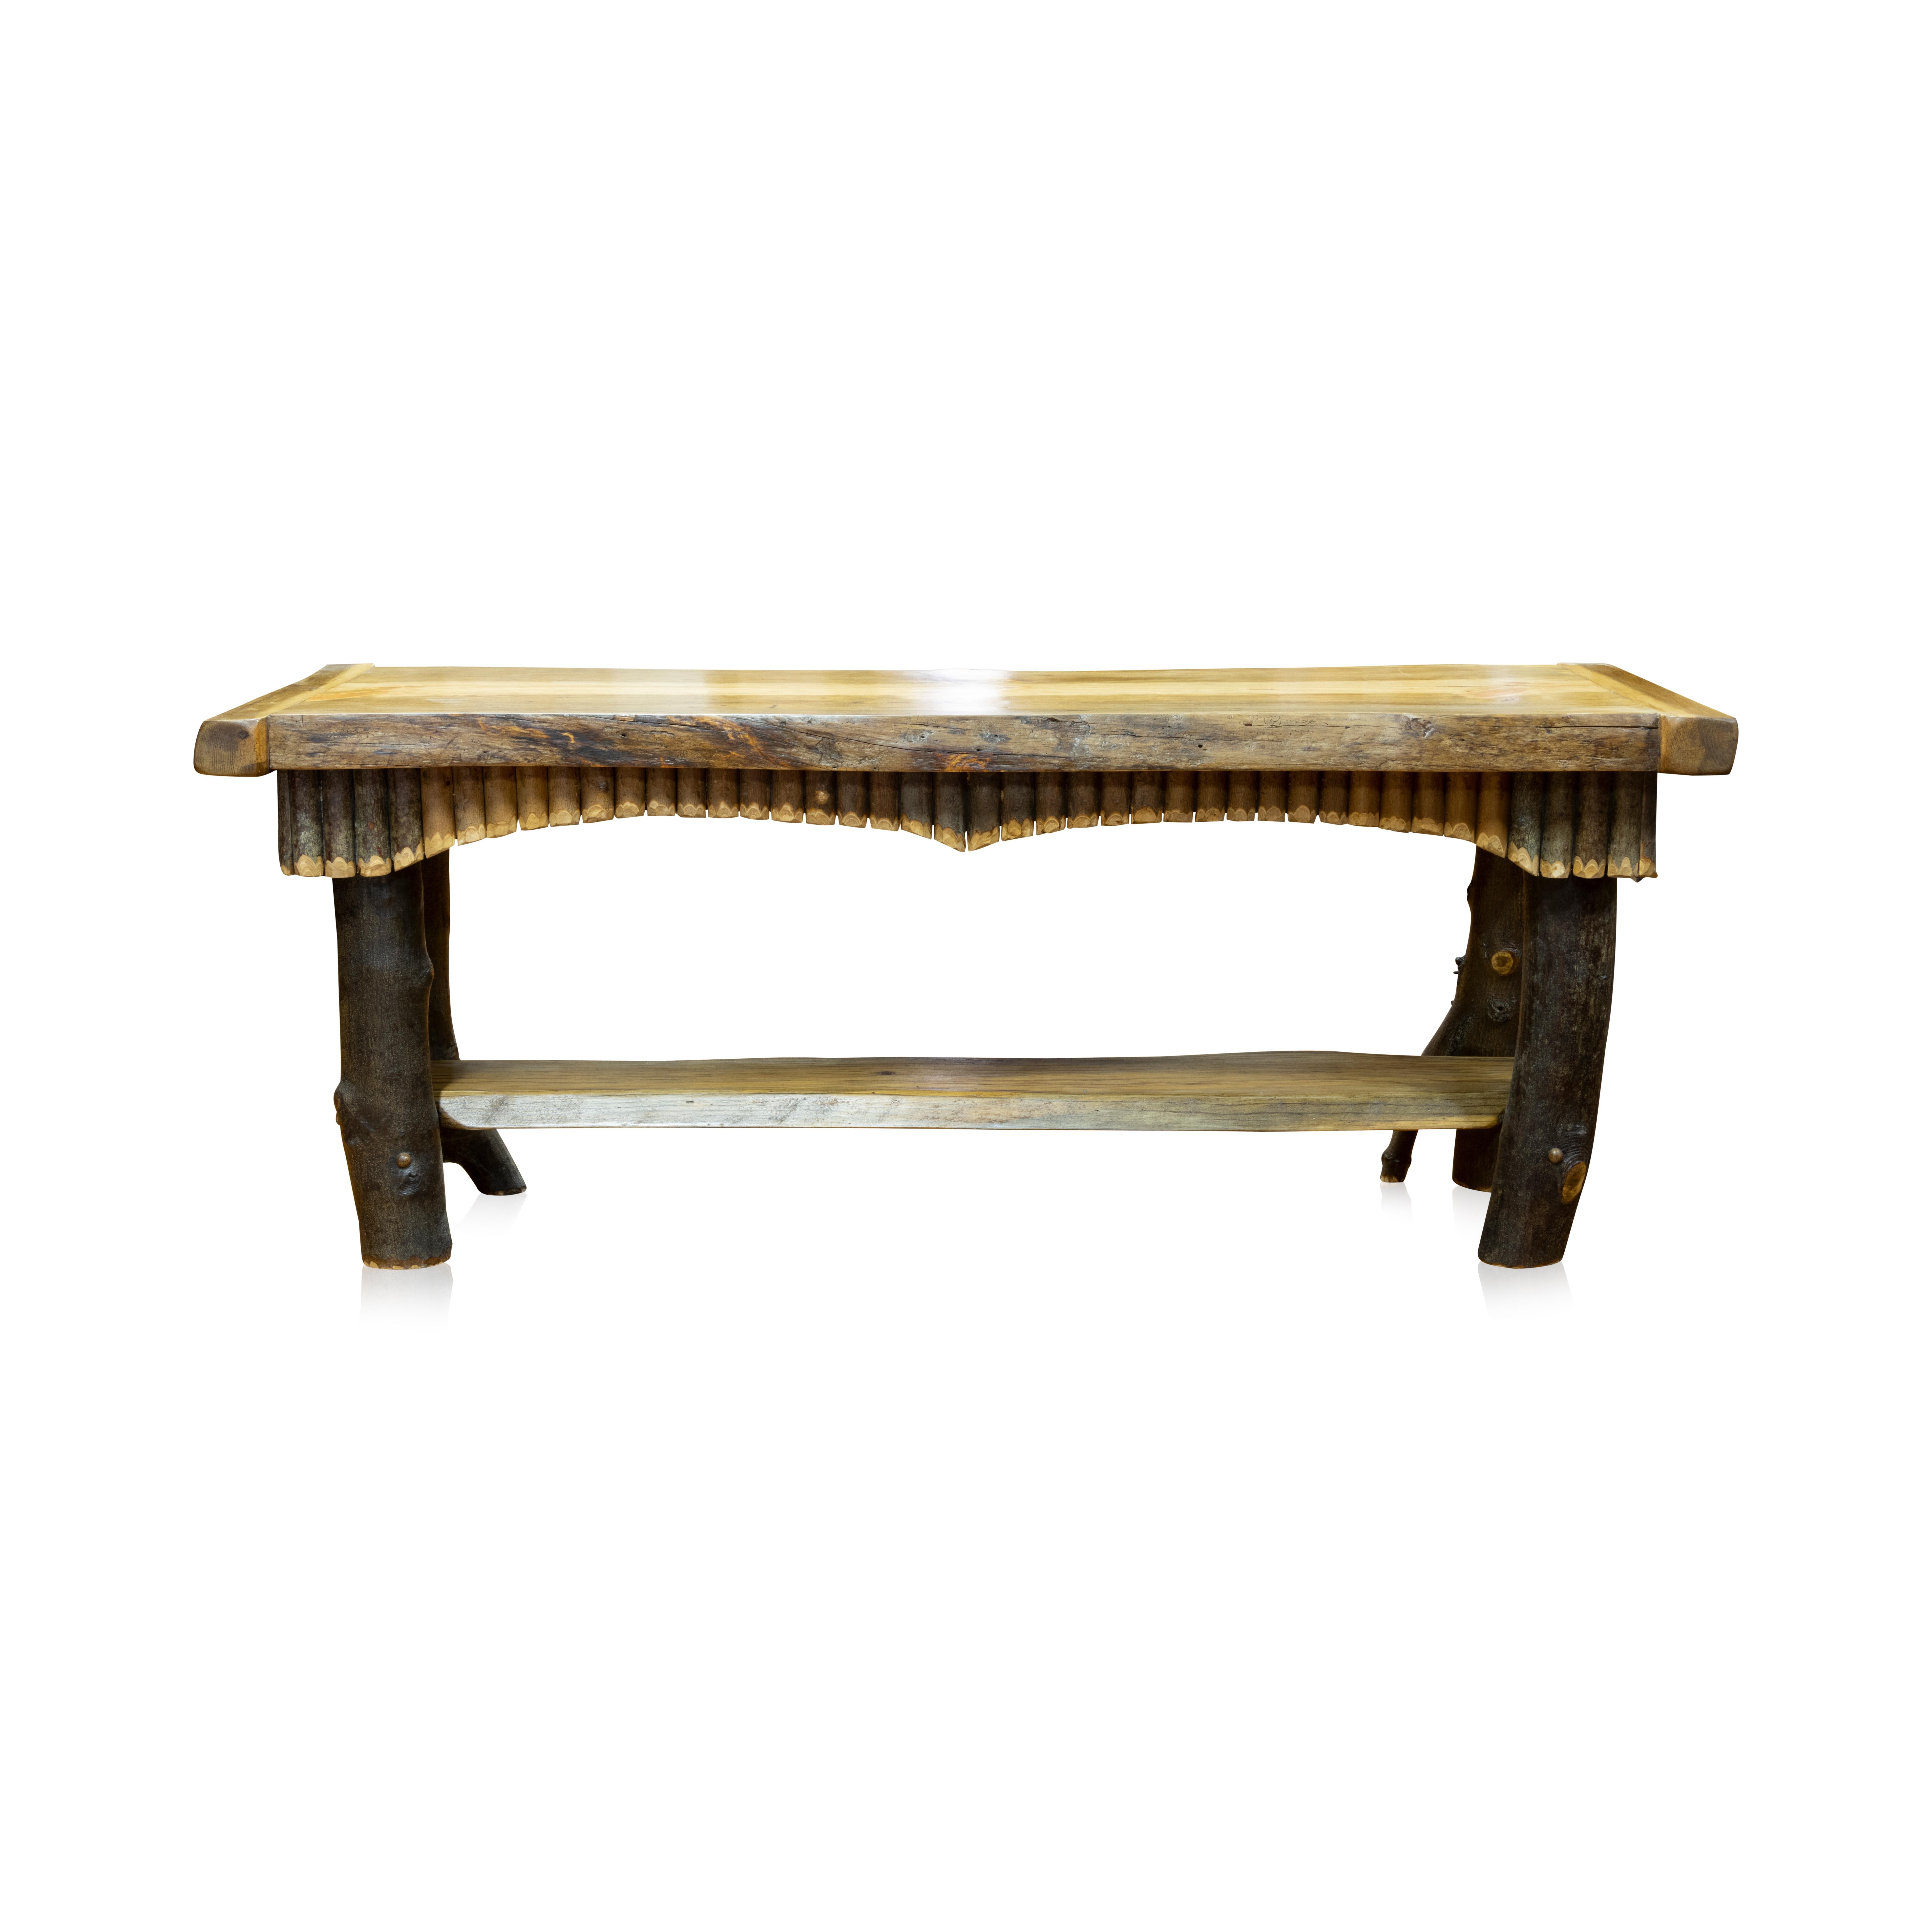 Cisco's Adirondack style coffee table with blue fir top having bread board ends, blue fir shelf, twig apron and maple legs. Matches pair of lamp tables #D0884. Colors, embellishments, finish and sizes can all be customized with additional production